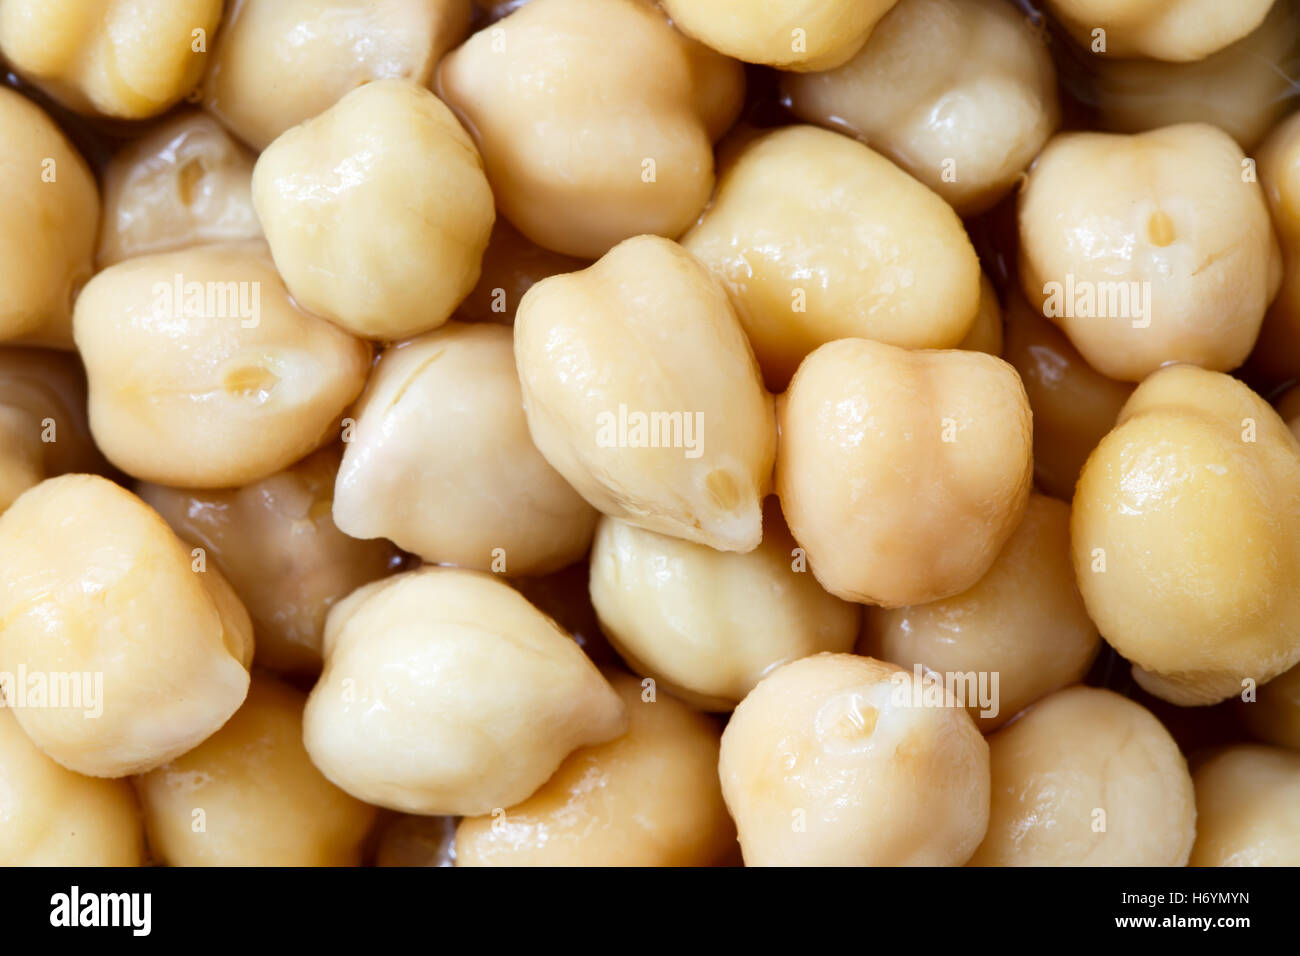 Background of cooked chickpeas from above. Stock Photo